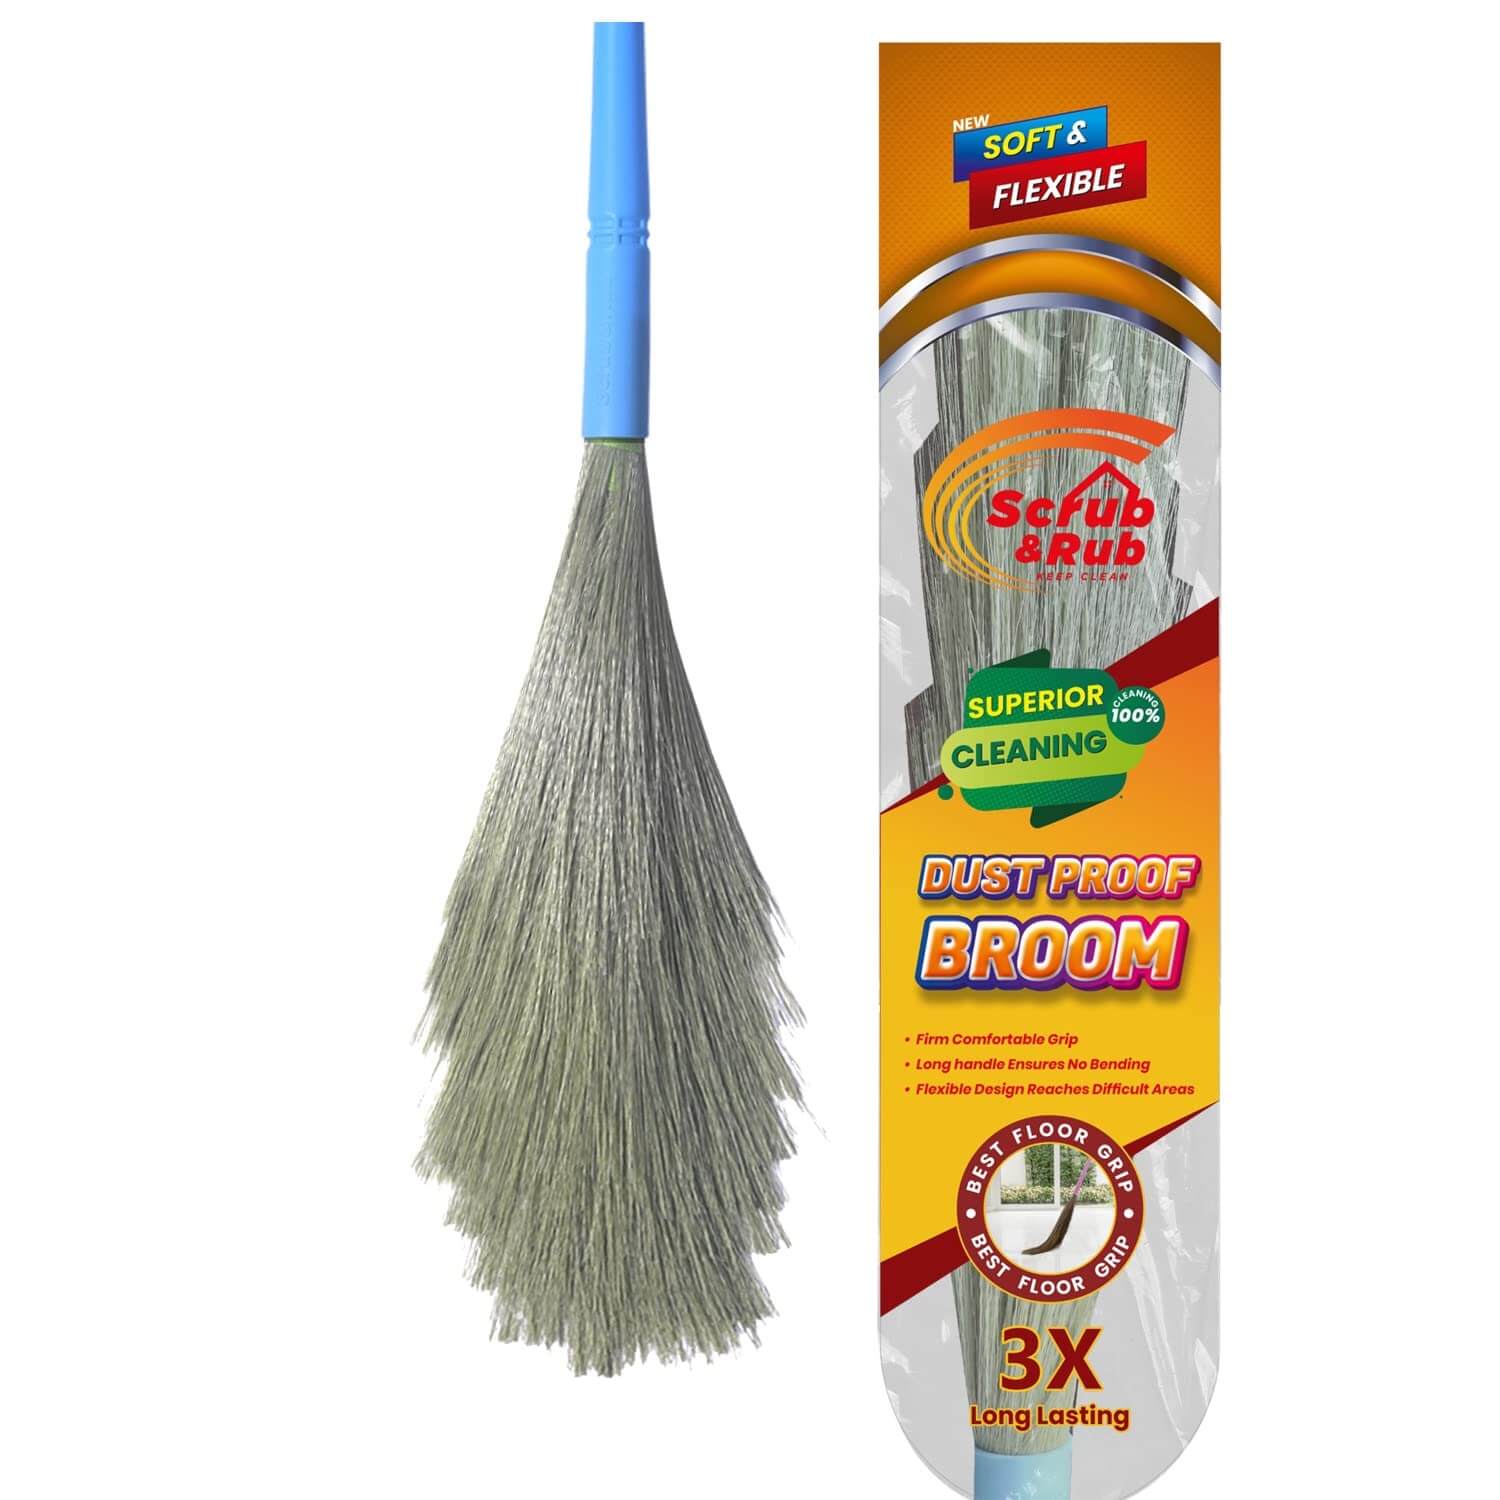 Best broom for home cleaning in India